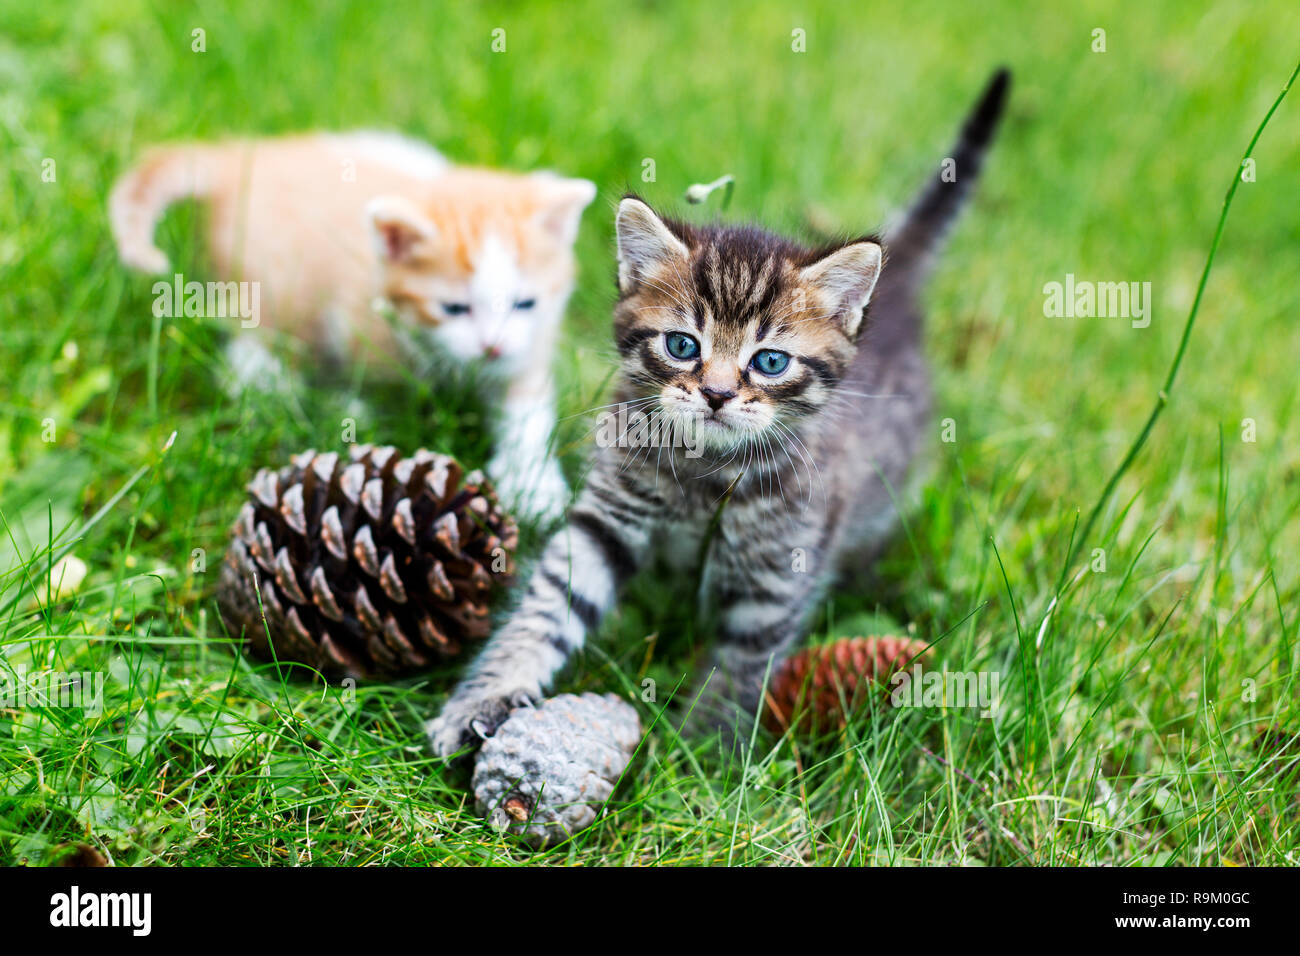 Gray tabby kitten playing with pine cones in green grass, blurry red kitten in the distance. Selective focus Stock Photo